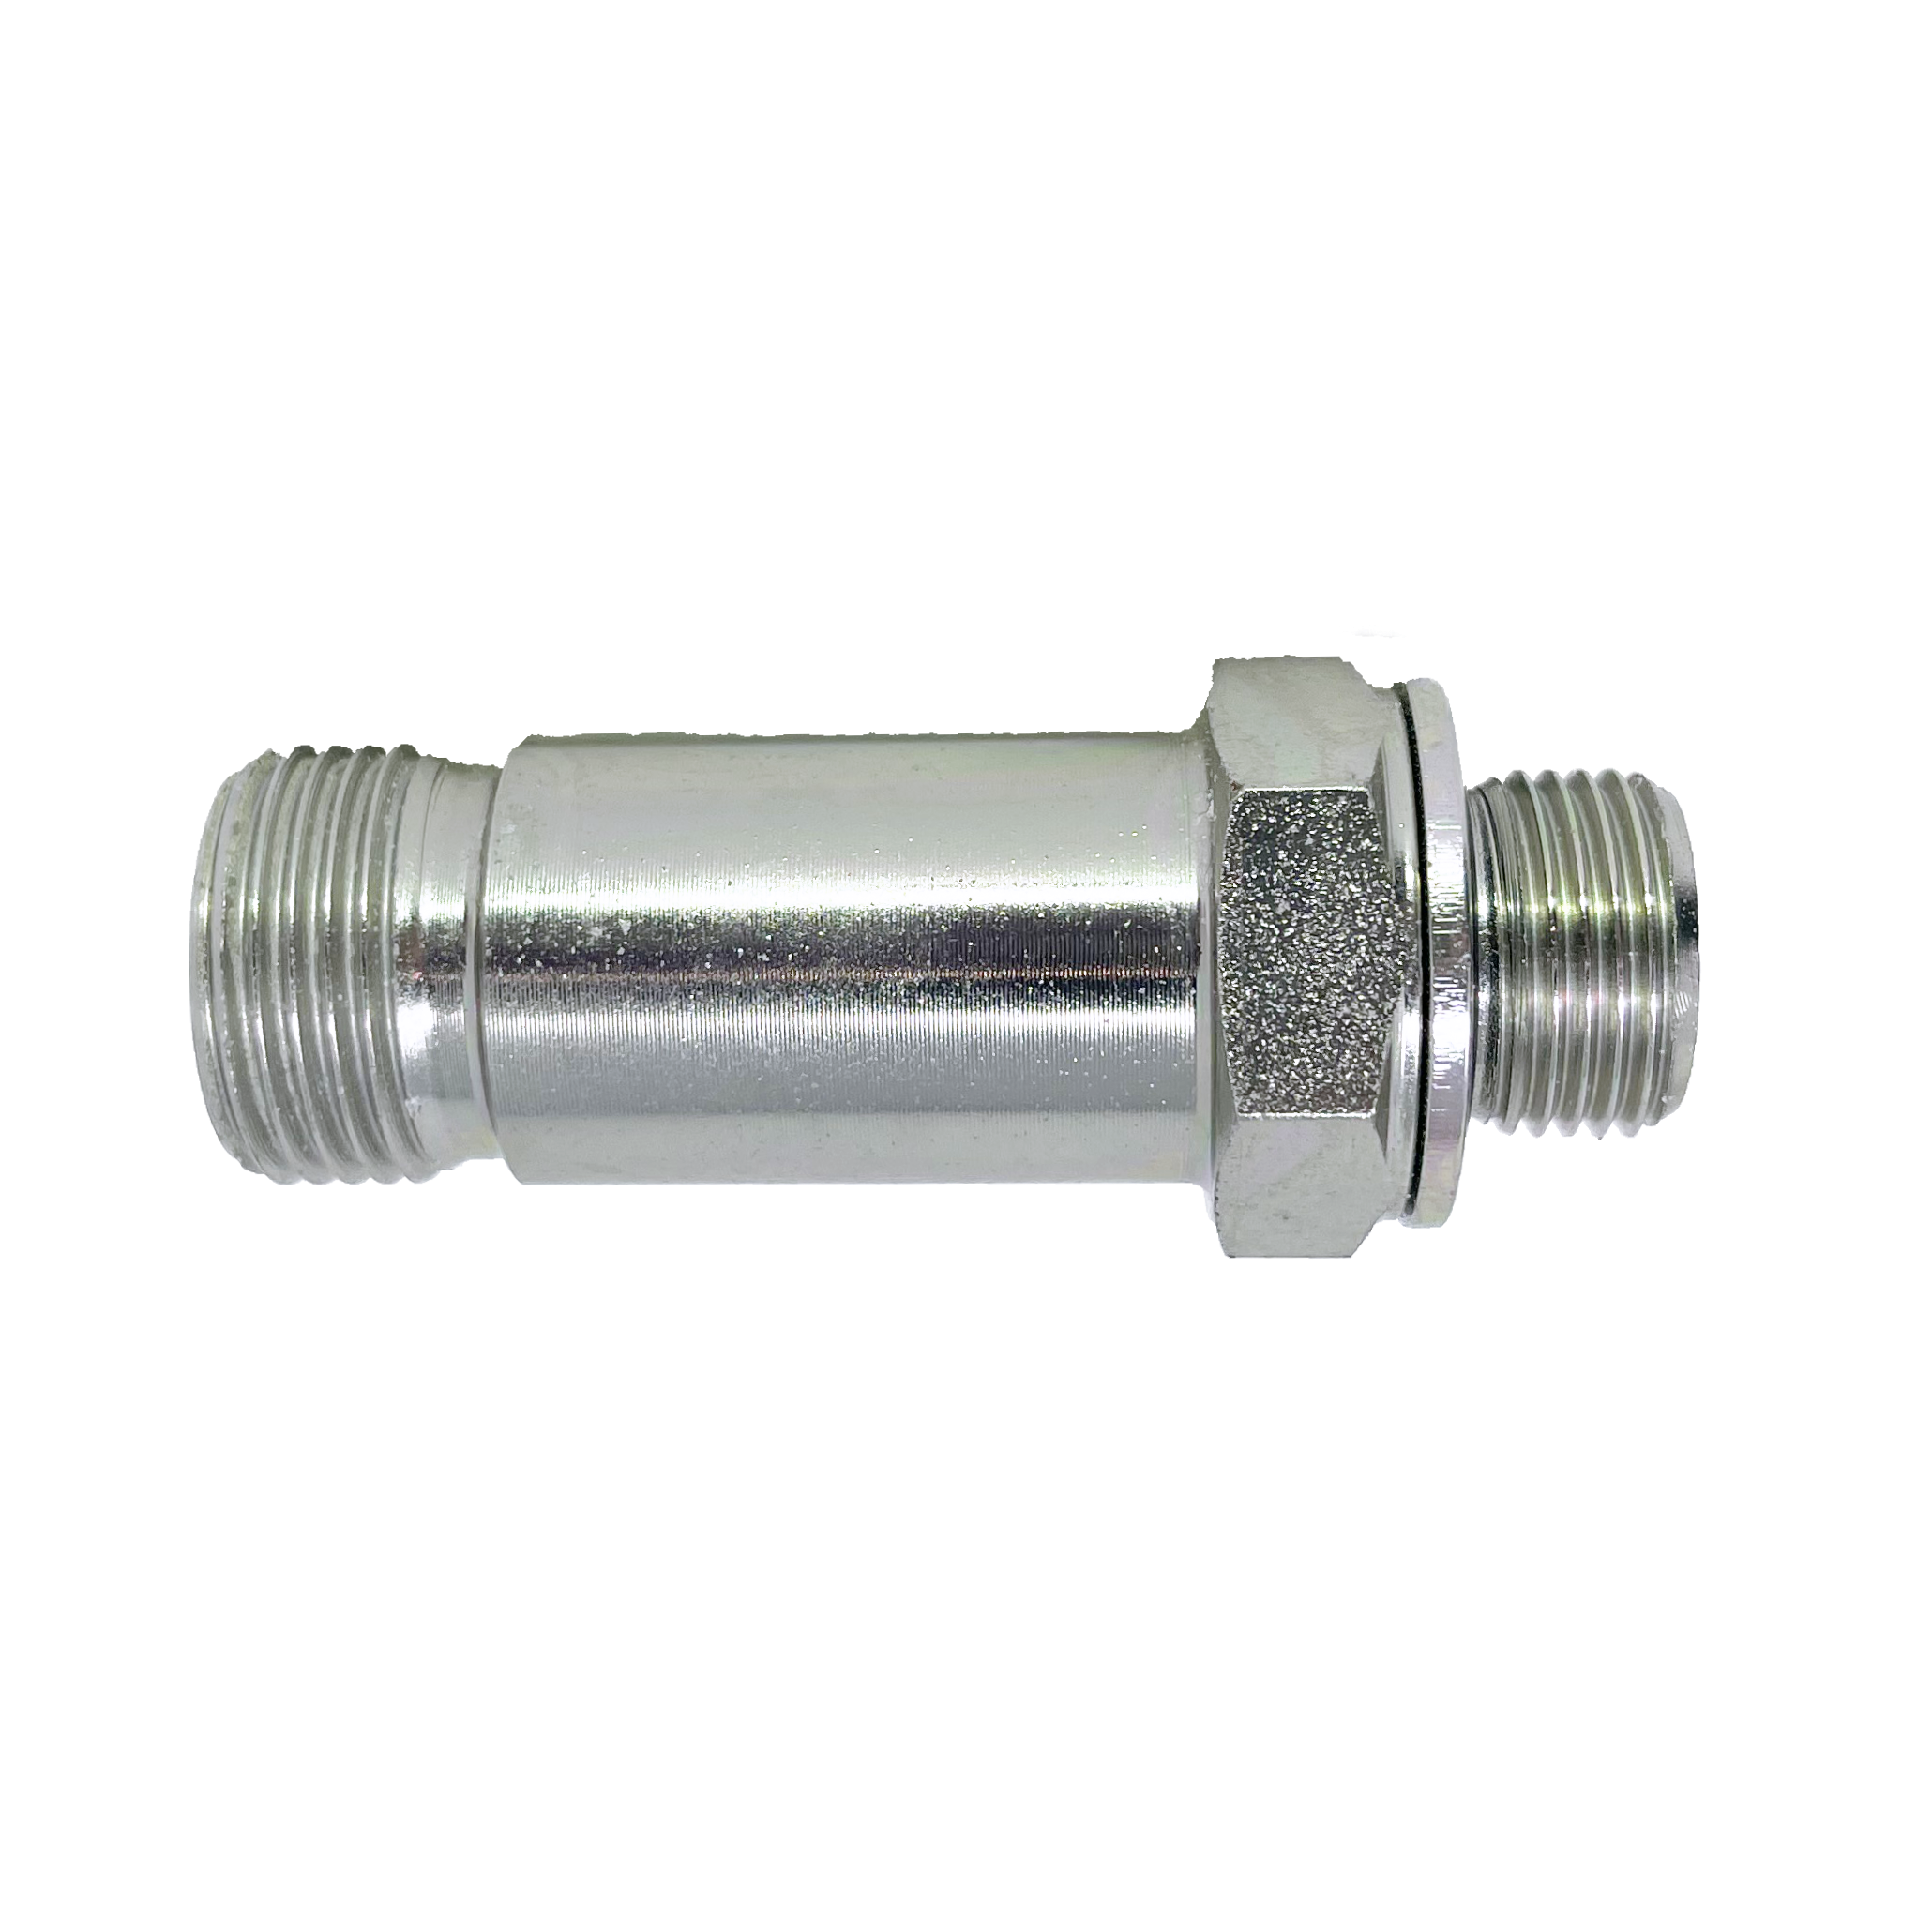 6002L-08-08 : Adaptall Straight Adapter, Male 0.5 (1/2") ORFS x Male 0.5 (1/2") BSPP, Carbon Steel